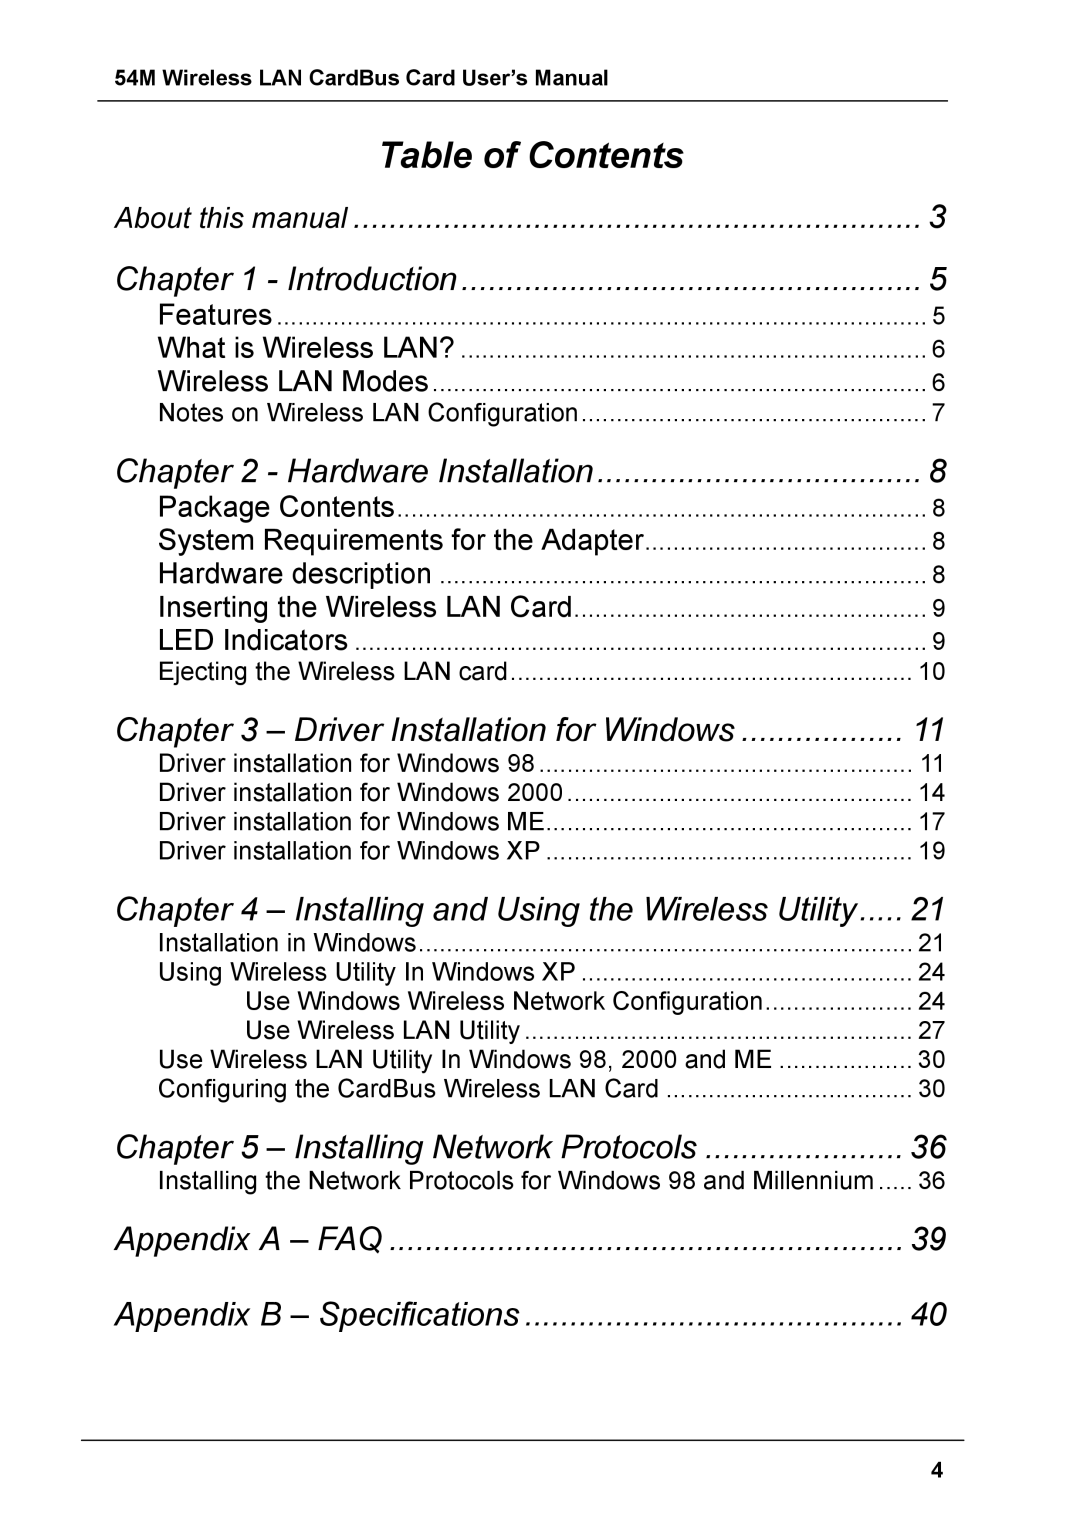 Boca Research 54M user manual Table of Contents 